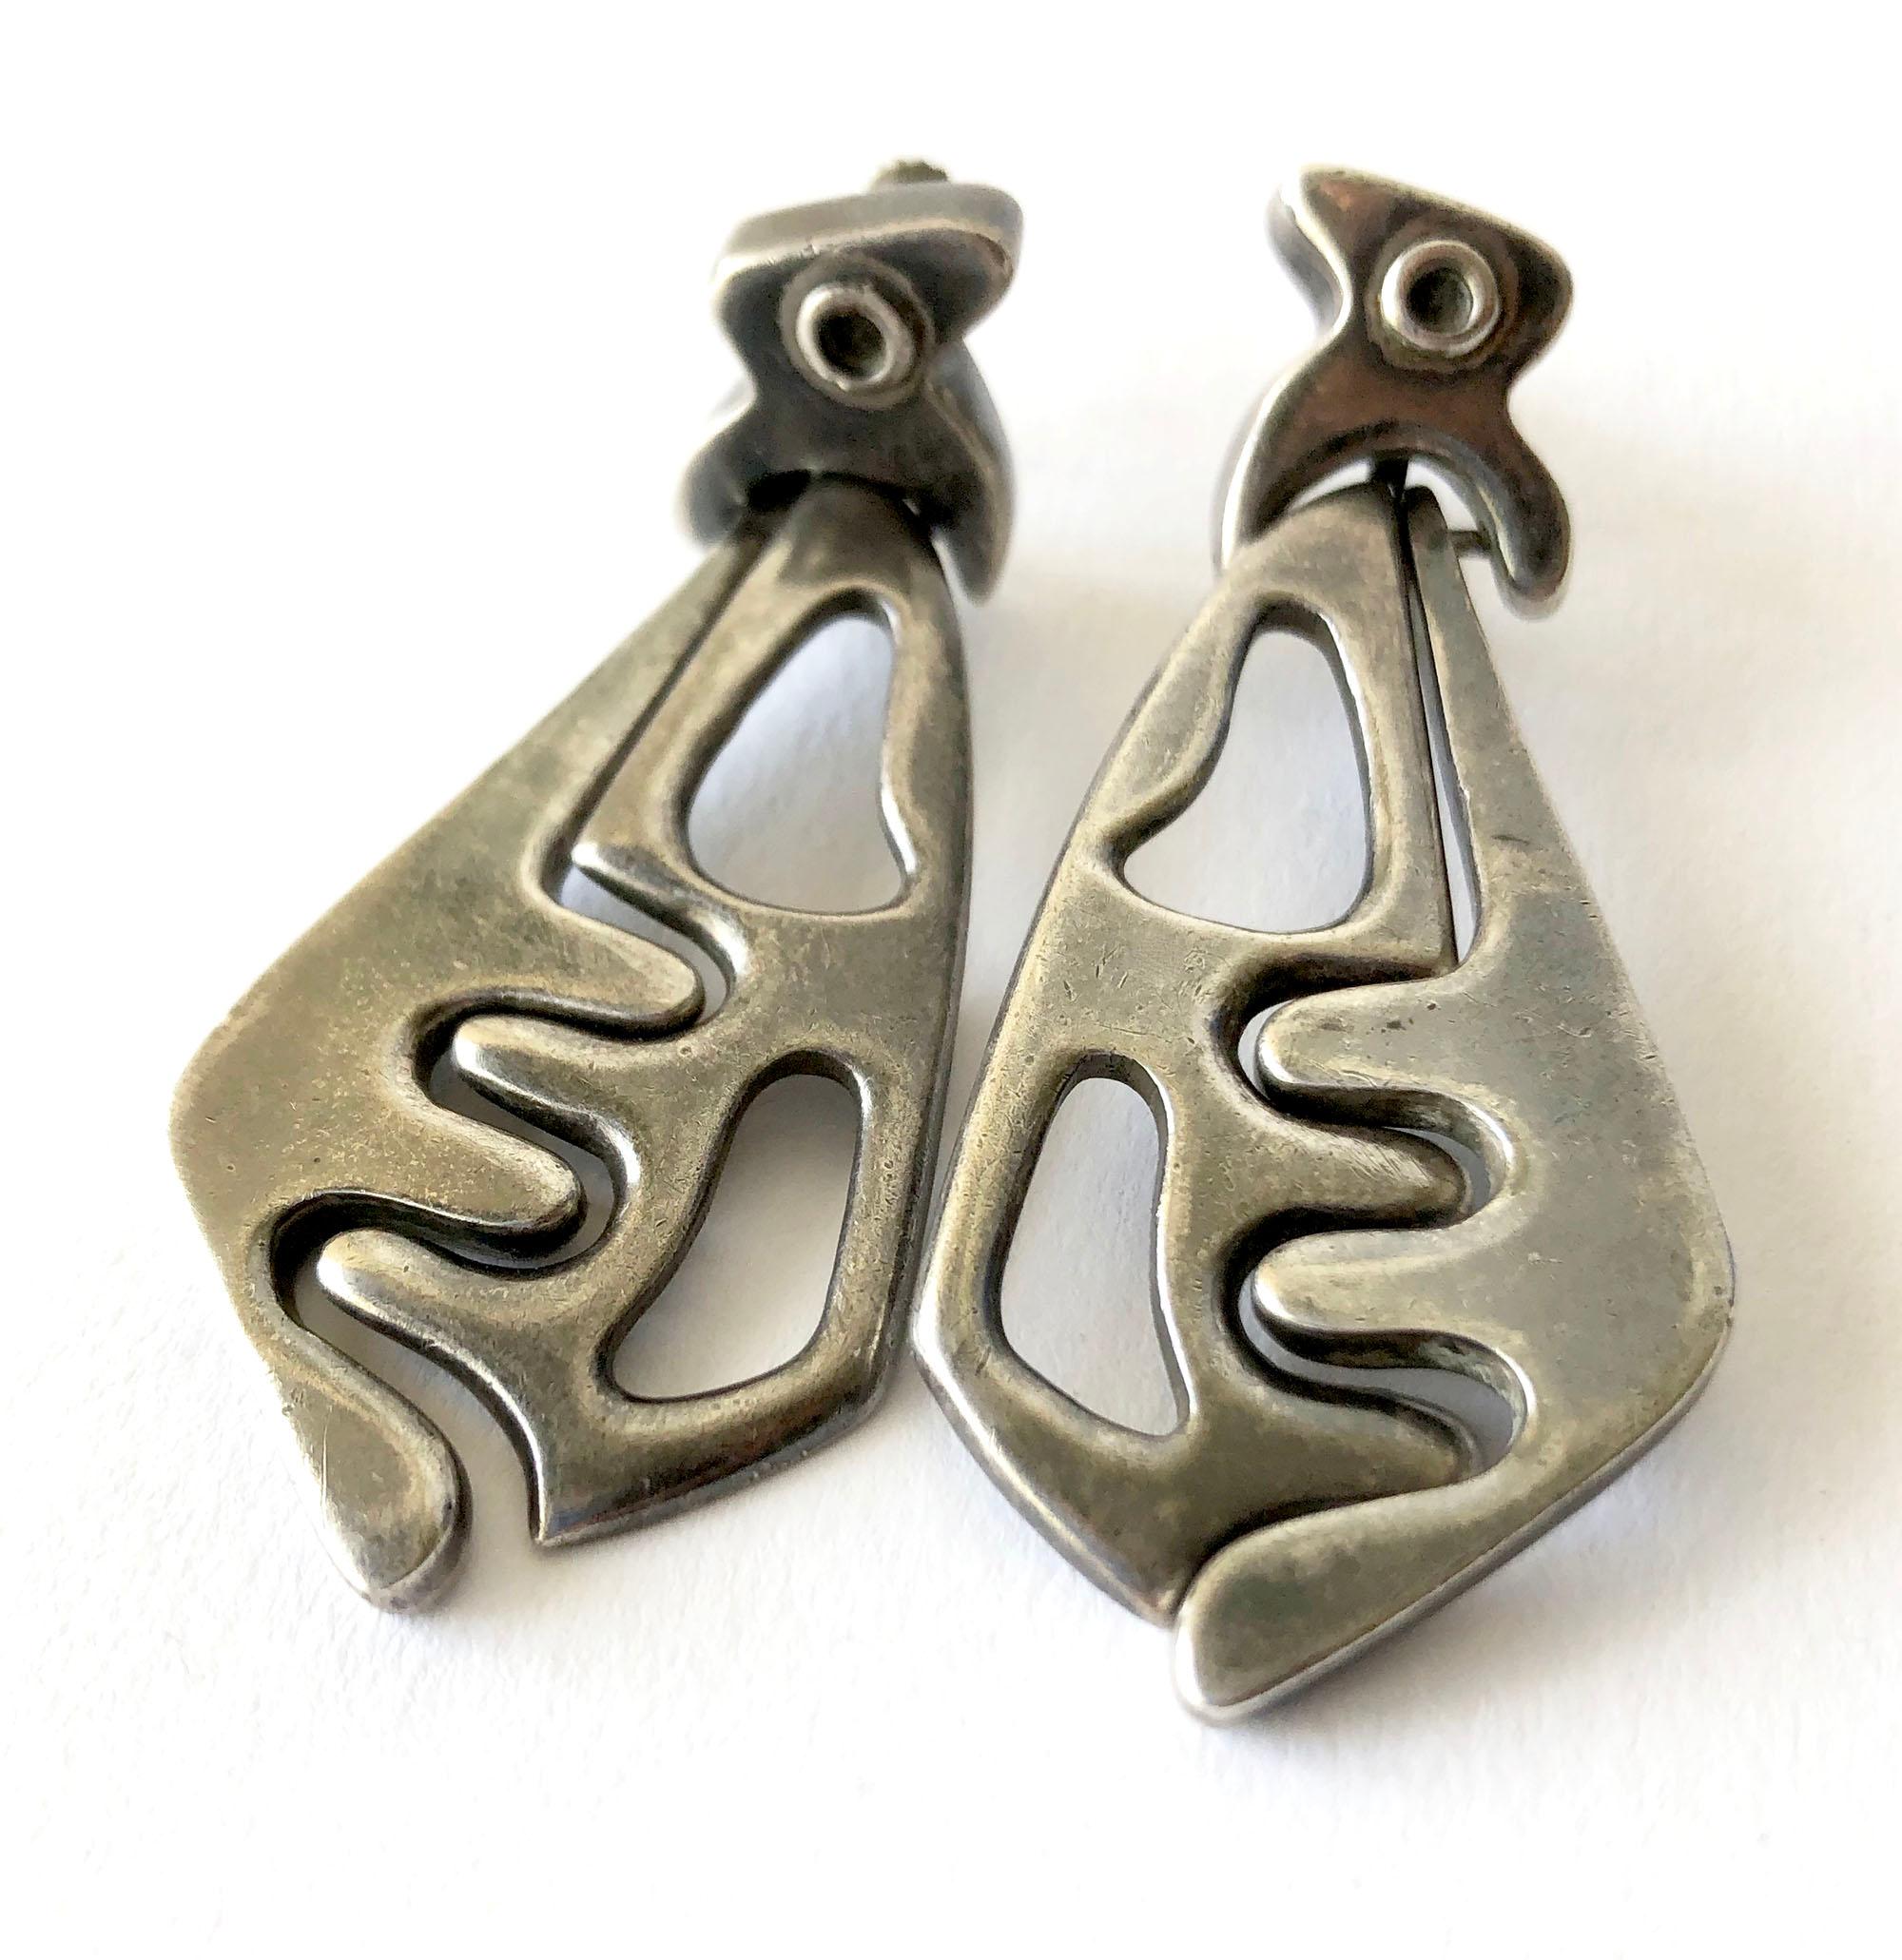 Sterling silver Mexican modernist dangling earrings created by Salvador Teran of Mexico.  Earrings are of the screwback variety and signed with his early shop marks, hallmark and Taller Mexico, 121.  Earrings measure 2.5